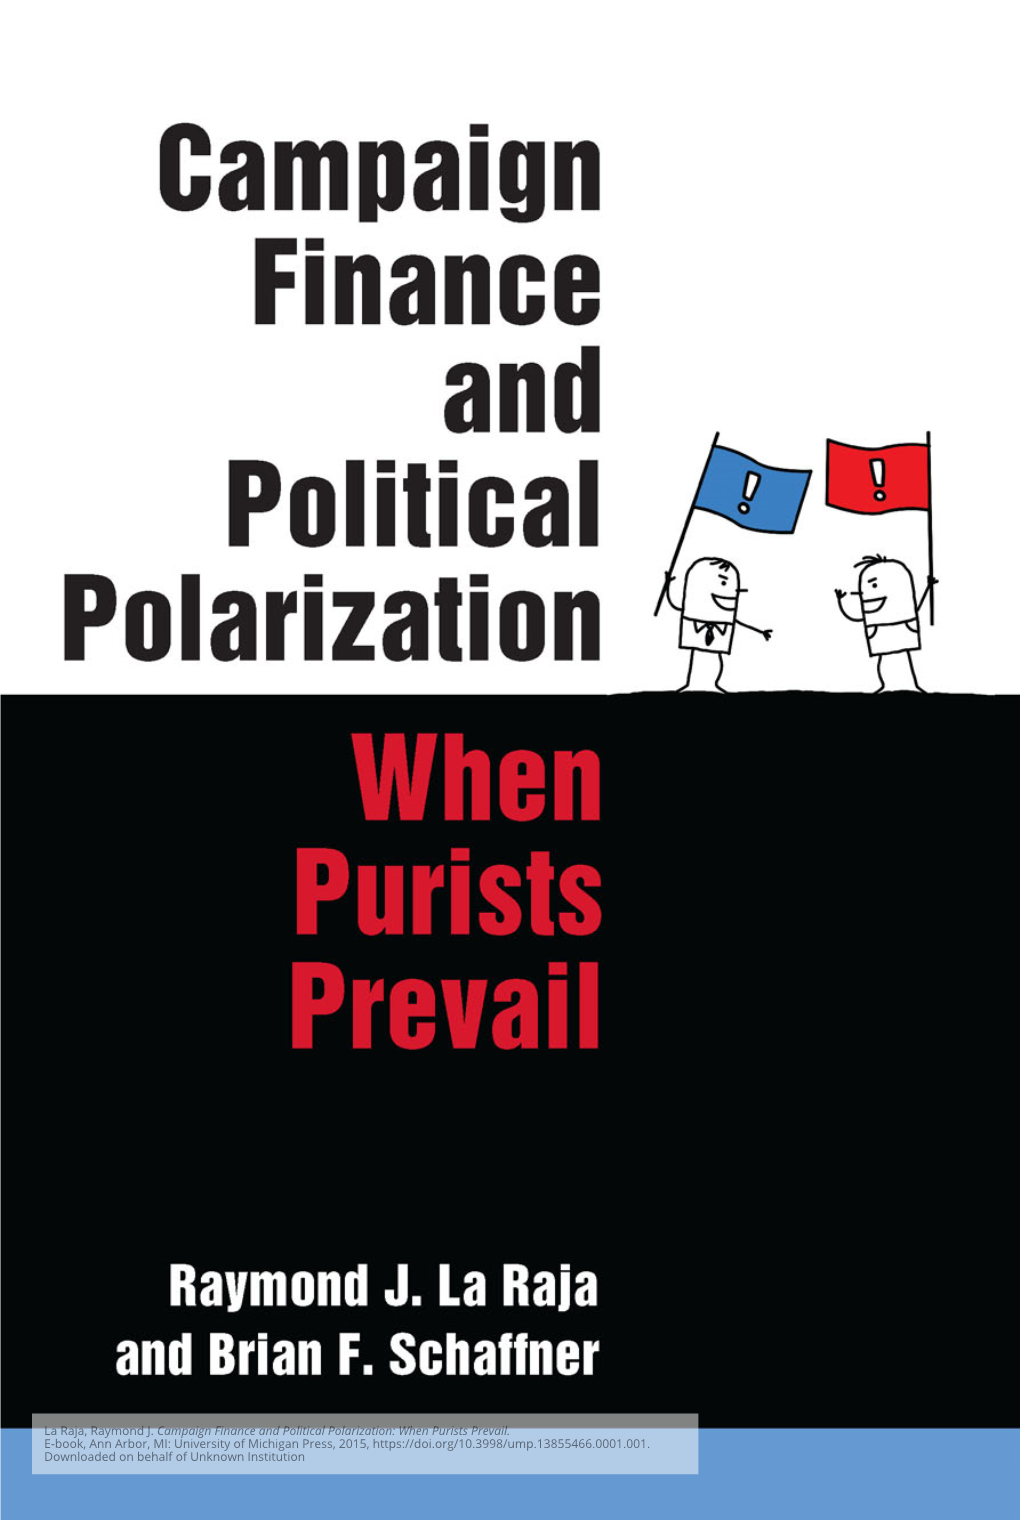 Campaign Finance and Political Polarization: When Purists Prevail